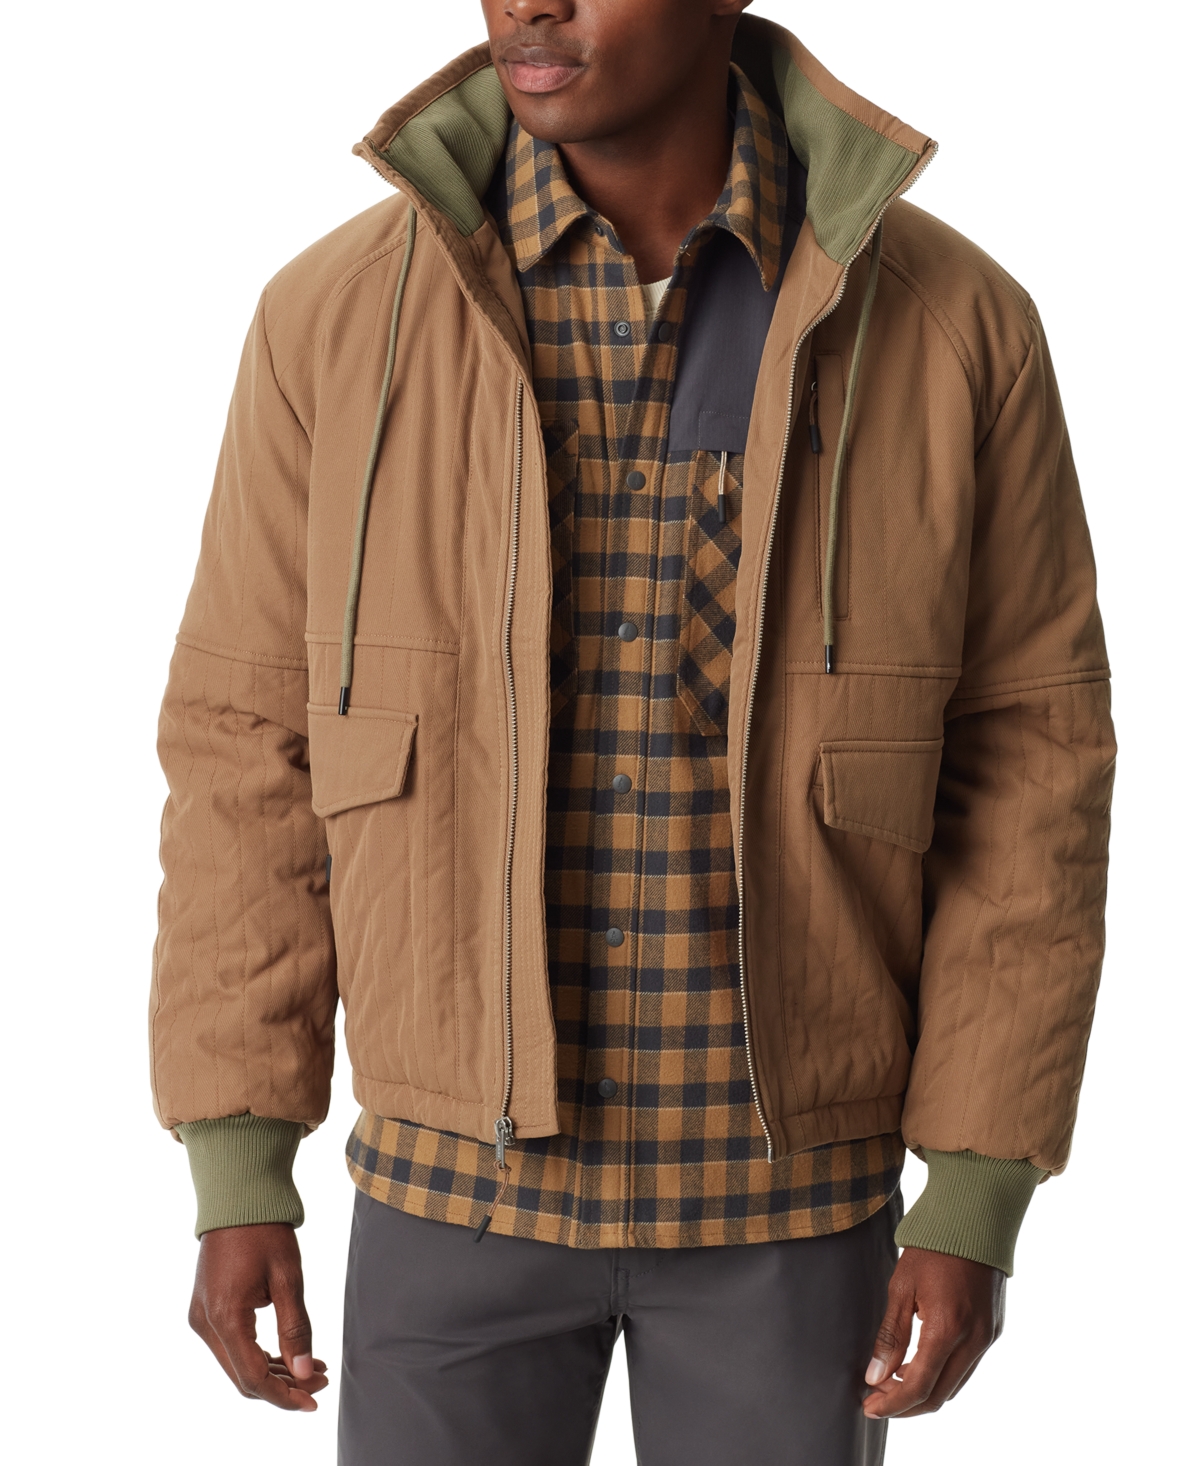 Men's Quilted Bomber Jacket - Ermine